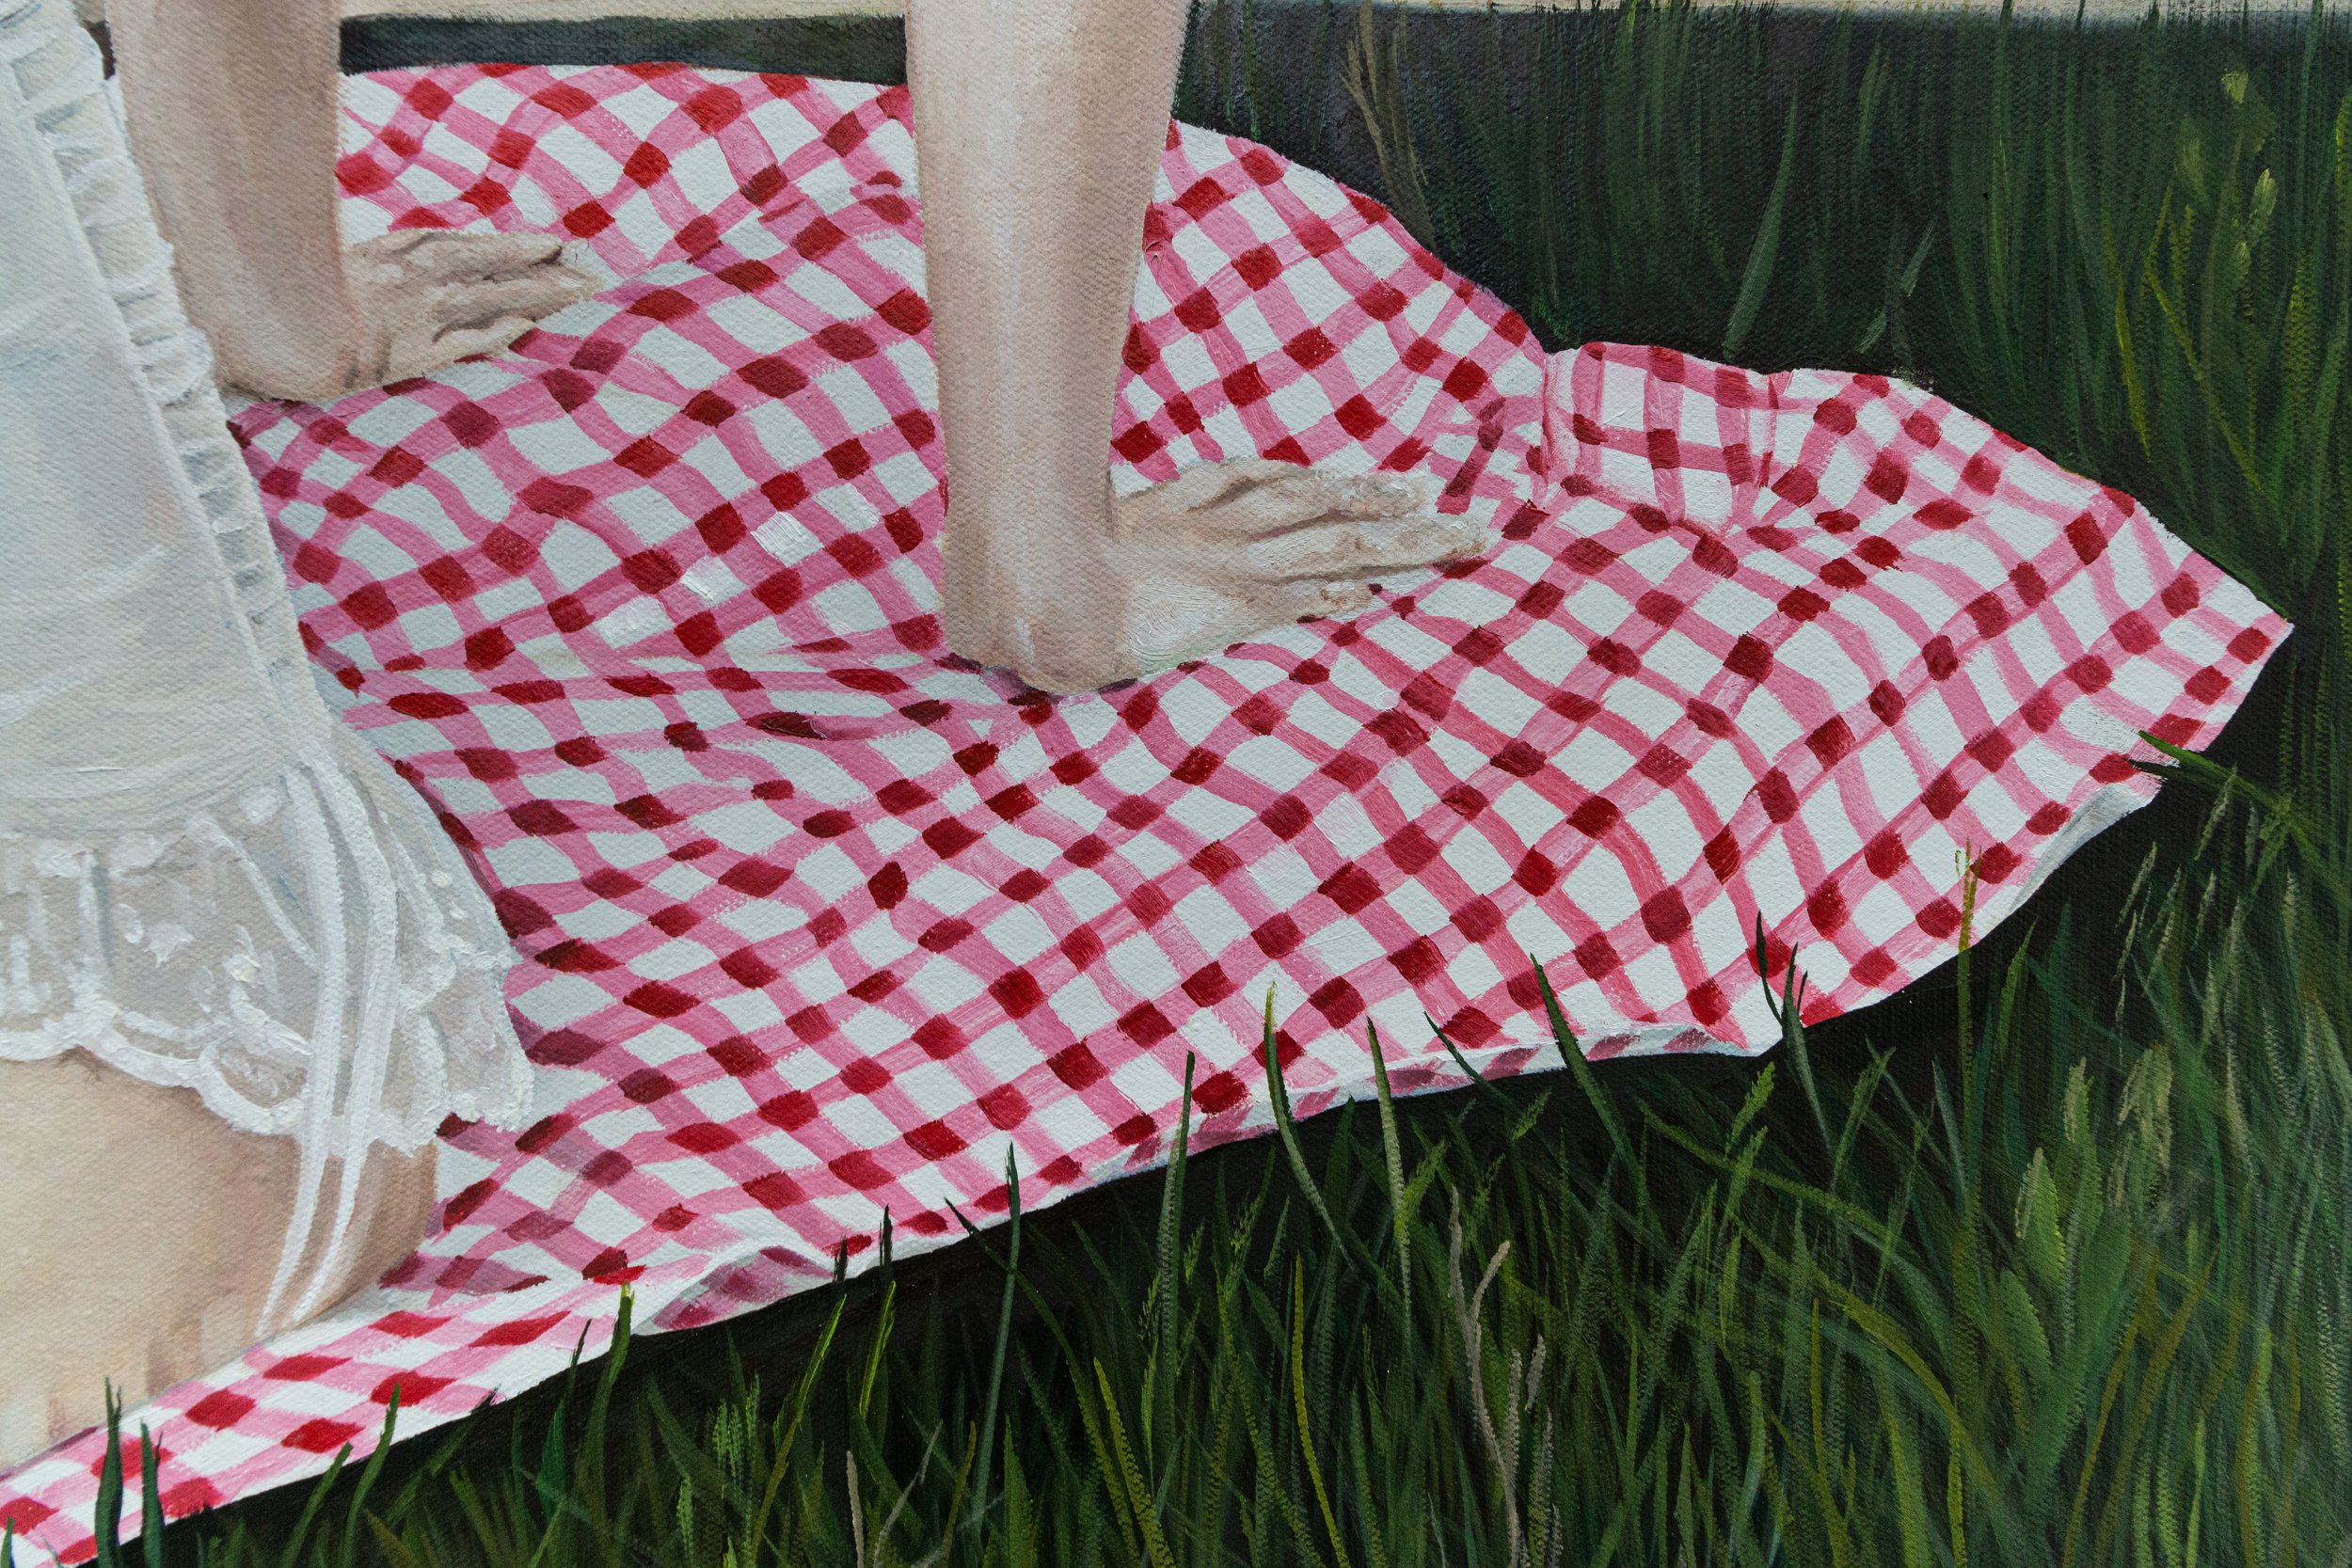 NT0003_Picnicfortwo_2021_30x40in_Courtesyoftheartistanddeboer,losangeles,ca_Detail3.jpg